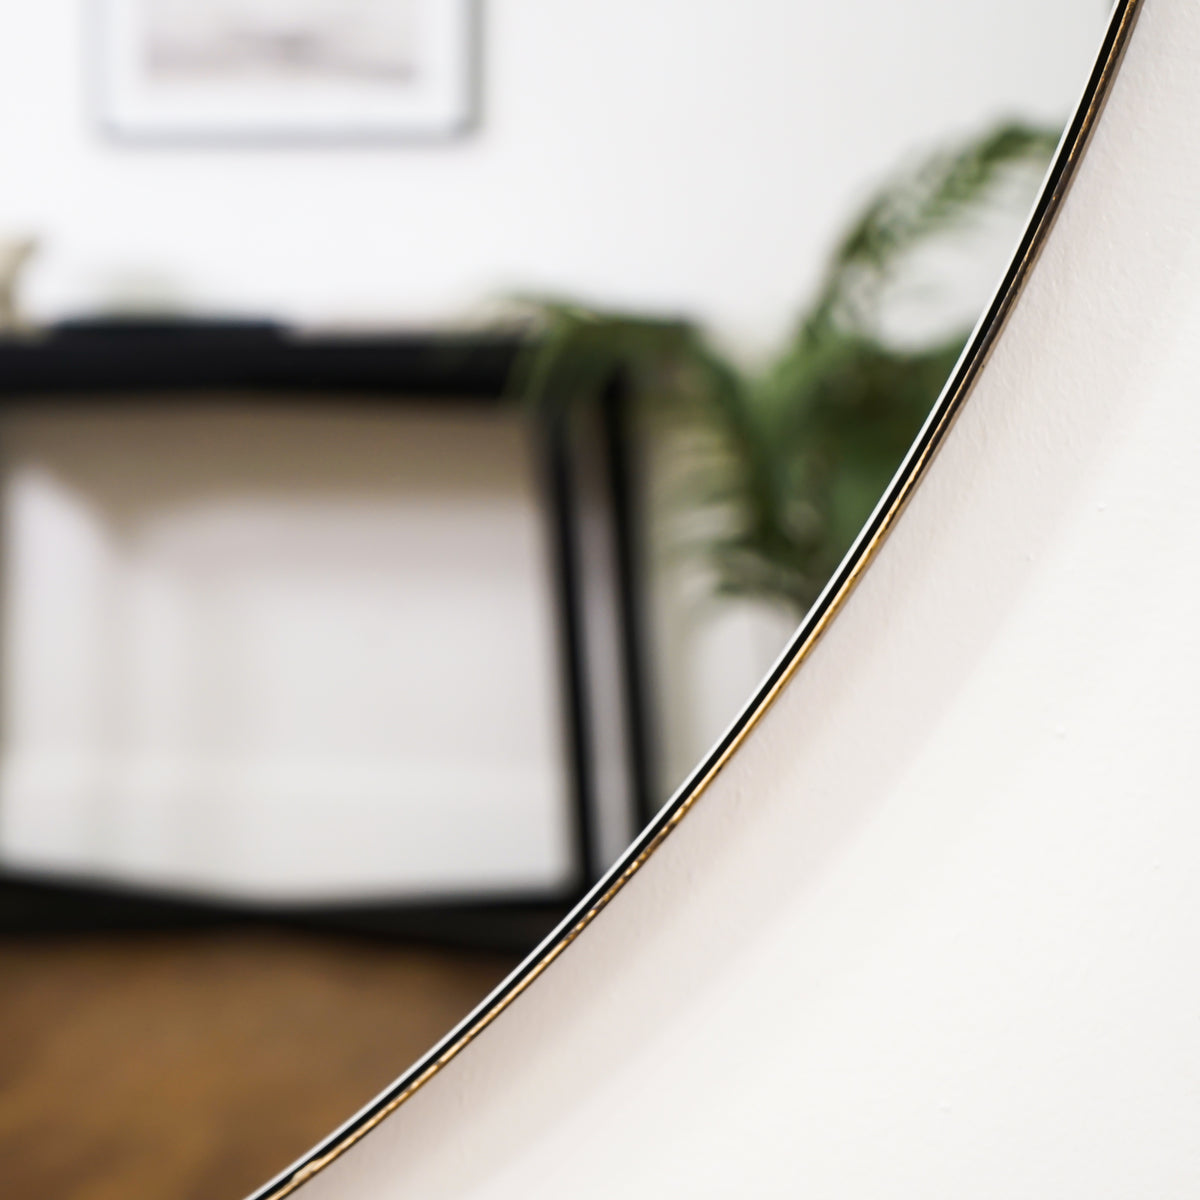 Detail shot of Gold Round Metal Extra Large Wall Mirror curved frame